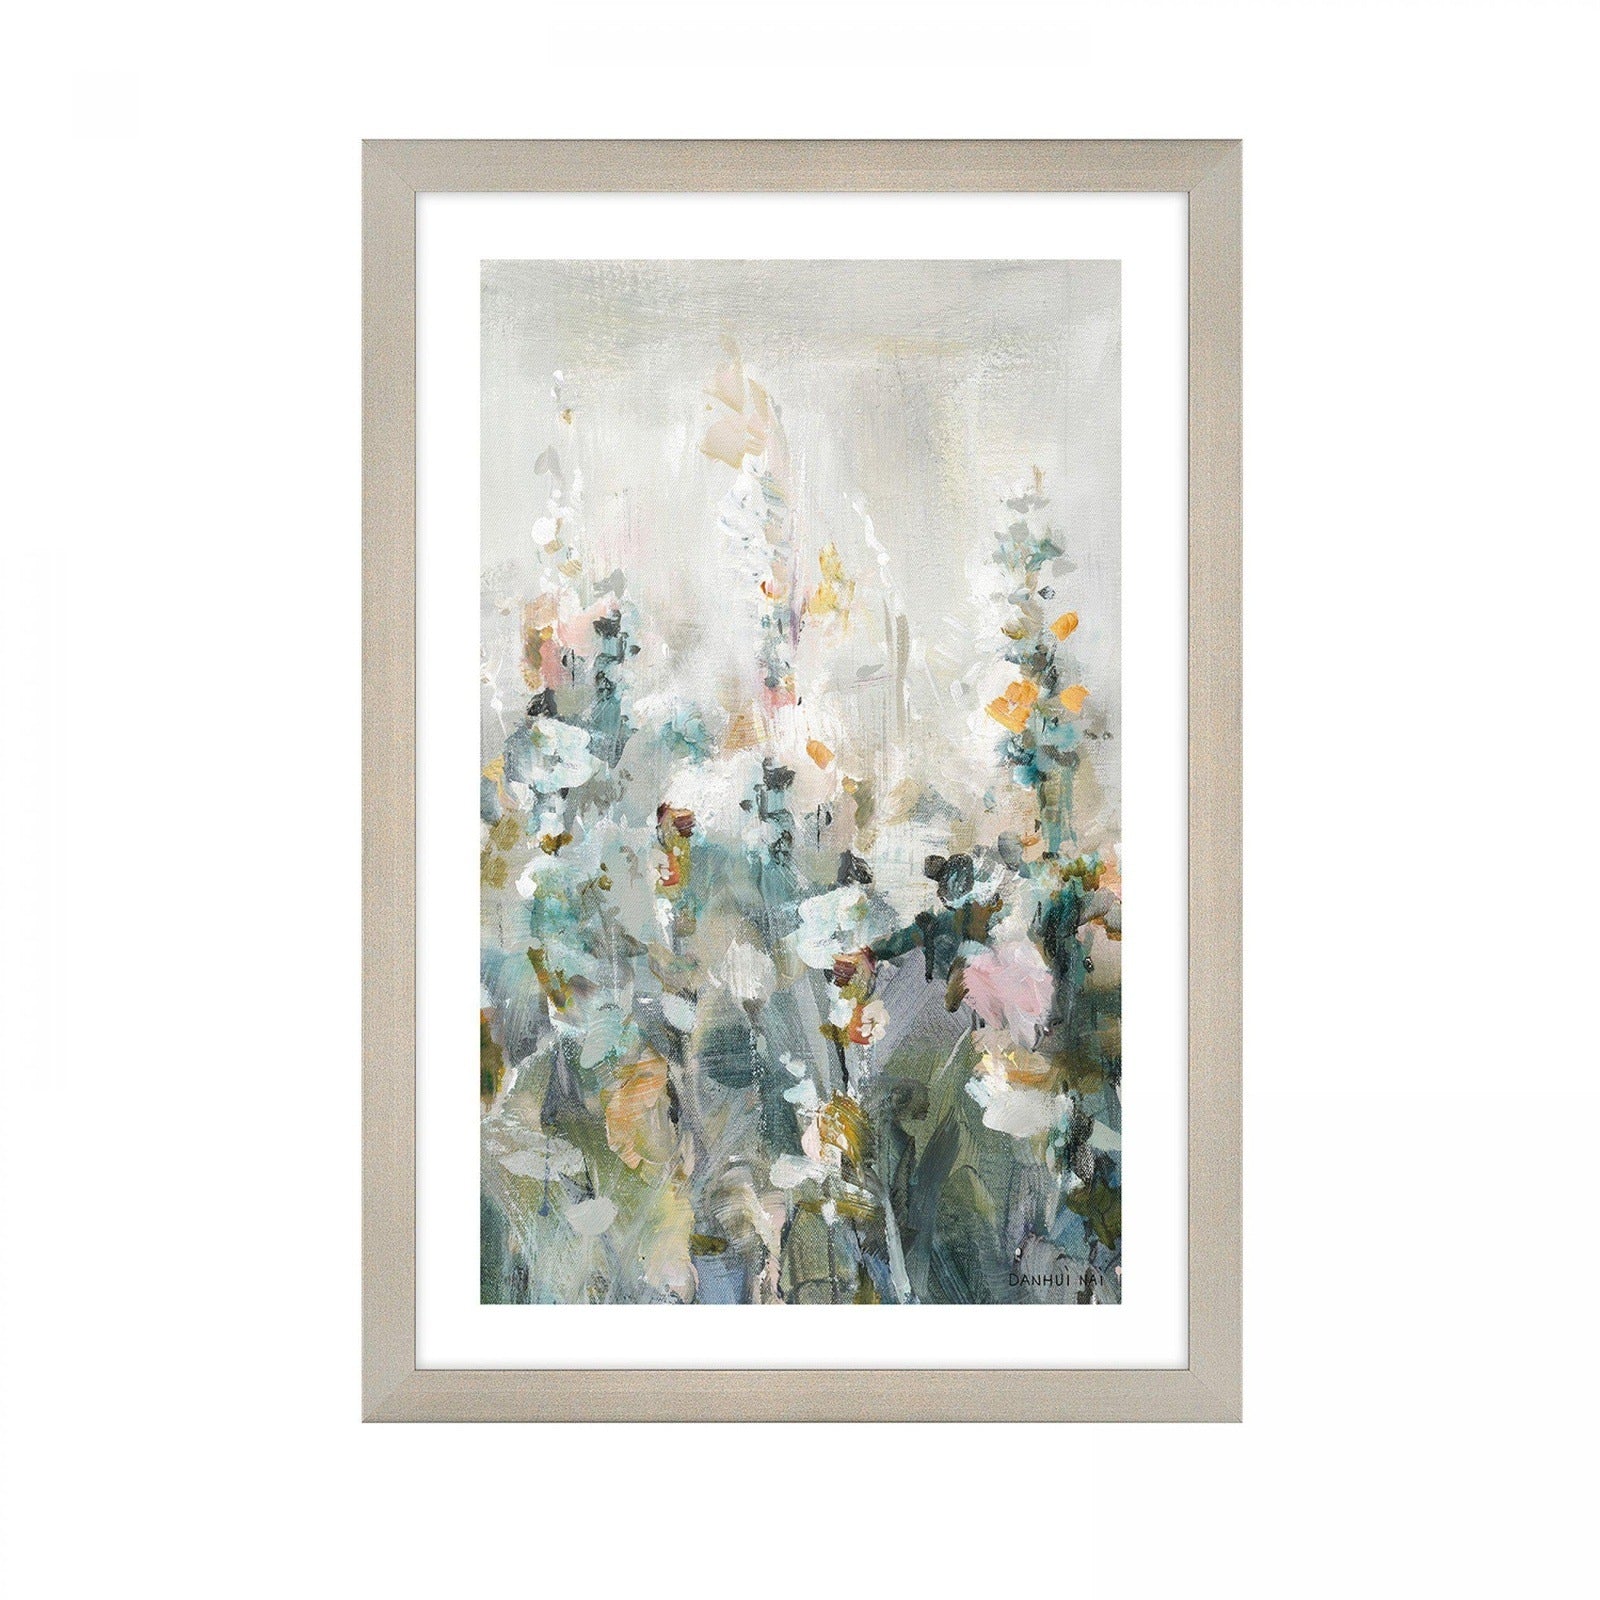 Gallery Interiors 'Floral Rapport' Framed Wall Art - 47 x 69cm